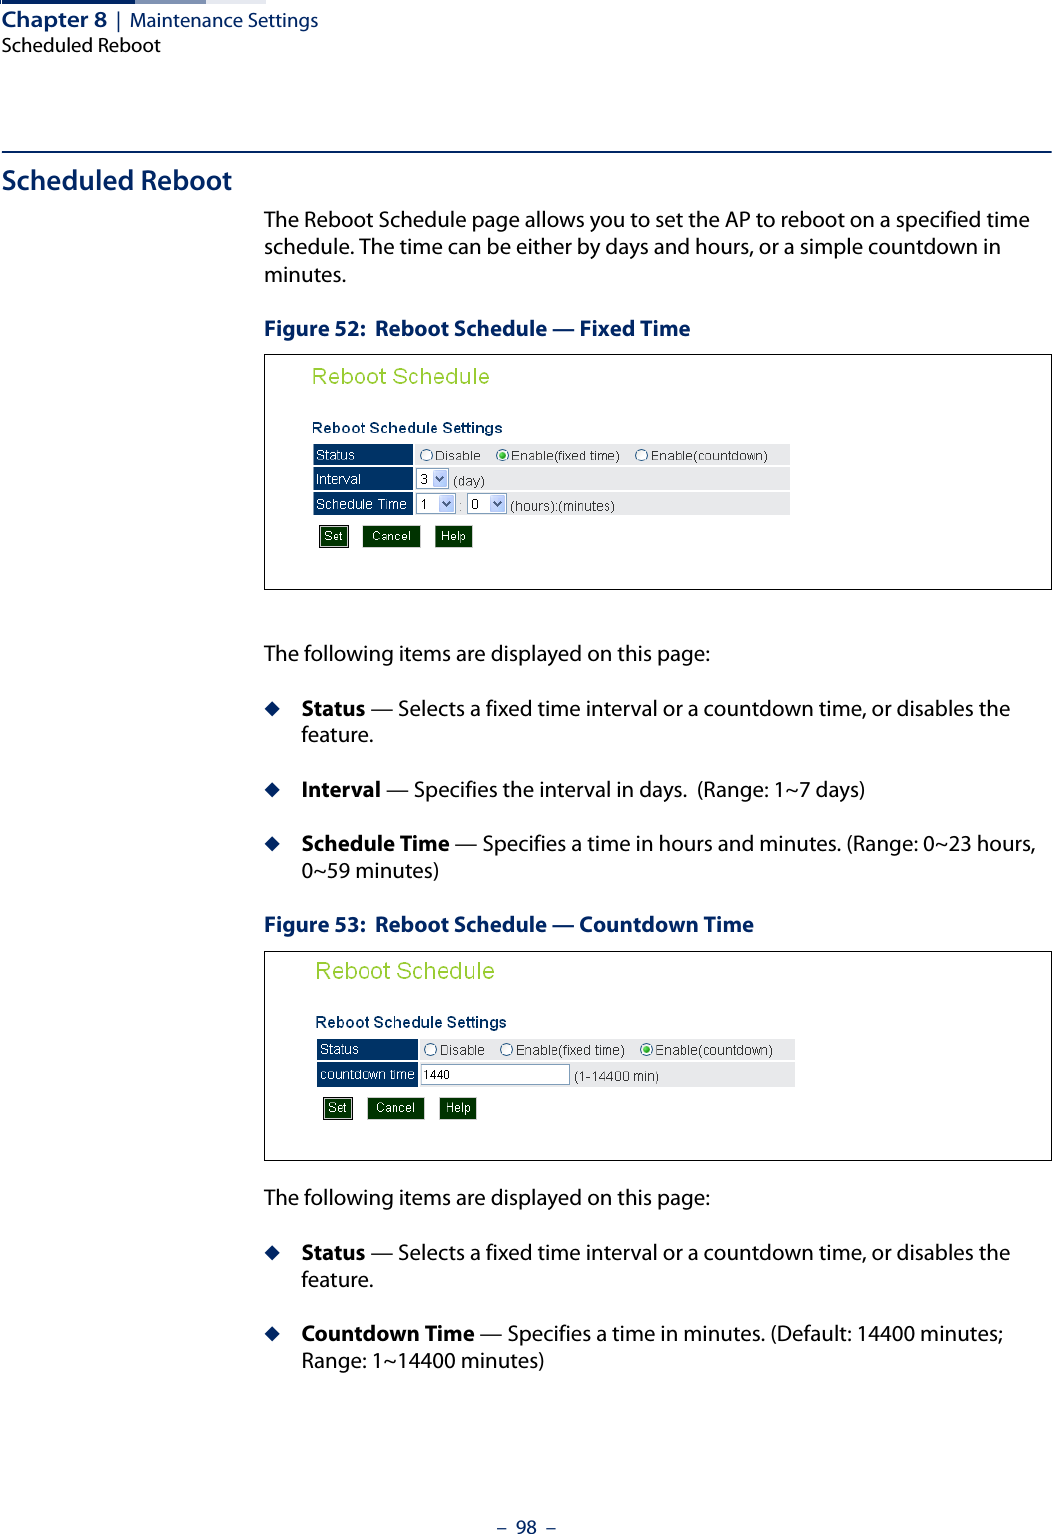 Chapter 8  |  Maintenance SettingsScheduled Reboot–  98  –Scheduled RebootThe Reboot Schedule page allows you to set the AP to reboot on a specified time schedule. The time can be either by days and hours, or a simple countdown in minutes.Figure 52:  Reboot Schedule — Fixed TimeThe following items are displayed on this page:◆Status — Selects a fixed time interval or a countdown time, or disables the feature.◆Interval — Specifies the interval in days.  (Range: 1~7 days)◆Schedule Time — Specifies a time in hours and minutes. (Range: 0~23 hours,  0~59 minutes)Figure 53:  Reboot Schedule — Countdown TimeThe following items are displayed on this page:◆Status — Selects a fixed time interval or a countdown time, or disables the feature.◆Countdown Time — Specifies a time in minutes. (Default: 14400 minutes; Range: 1~14400 minutes)